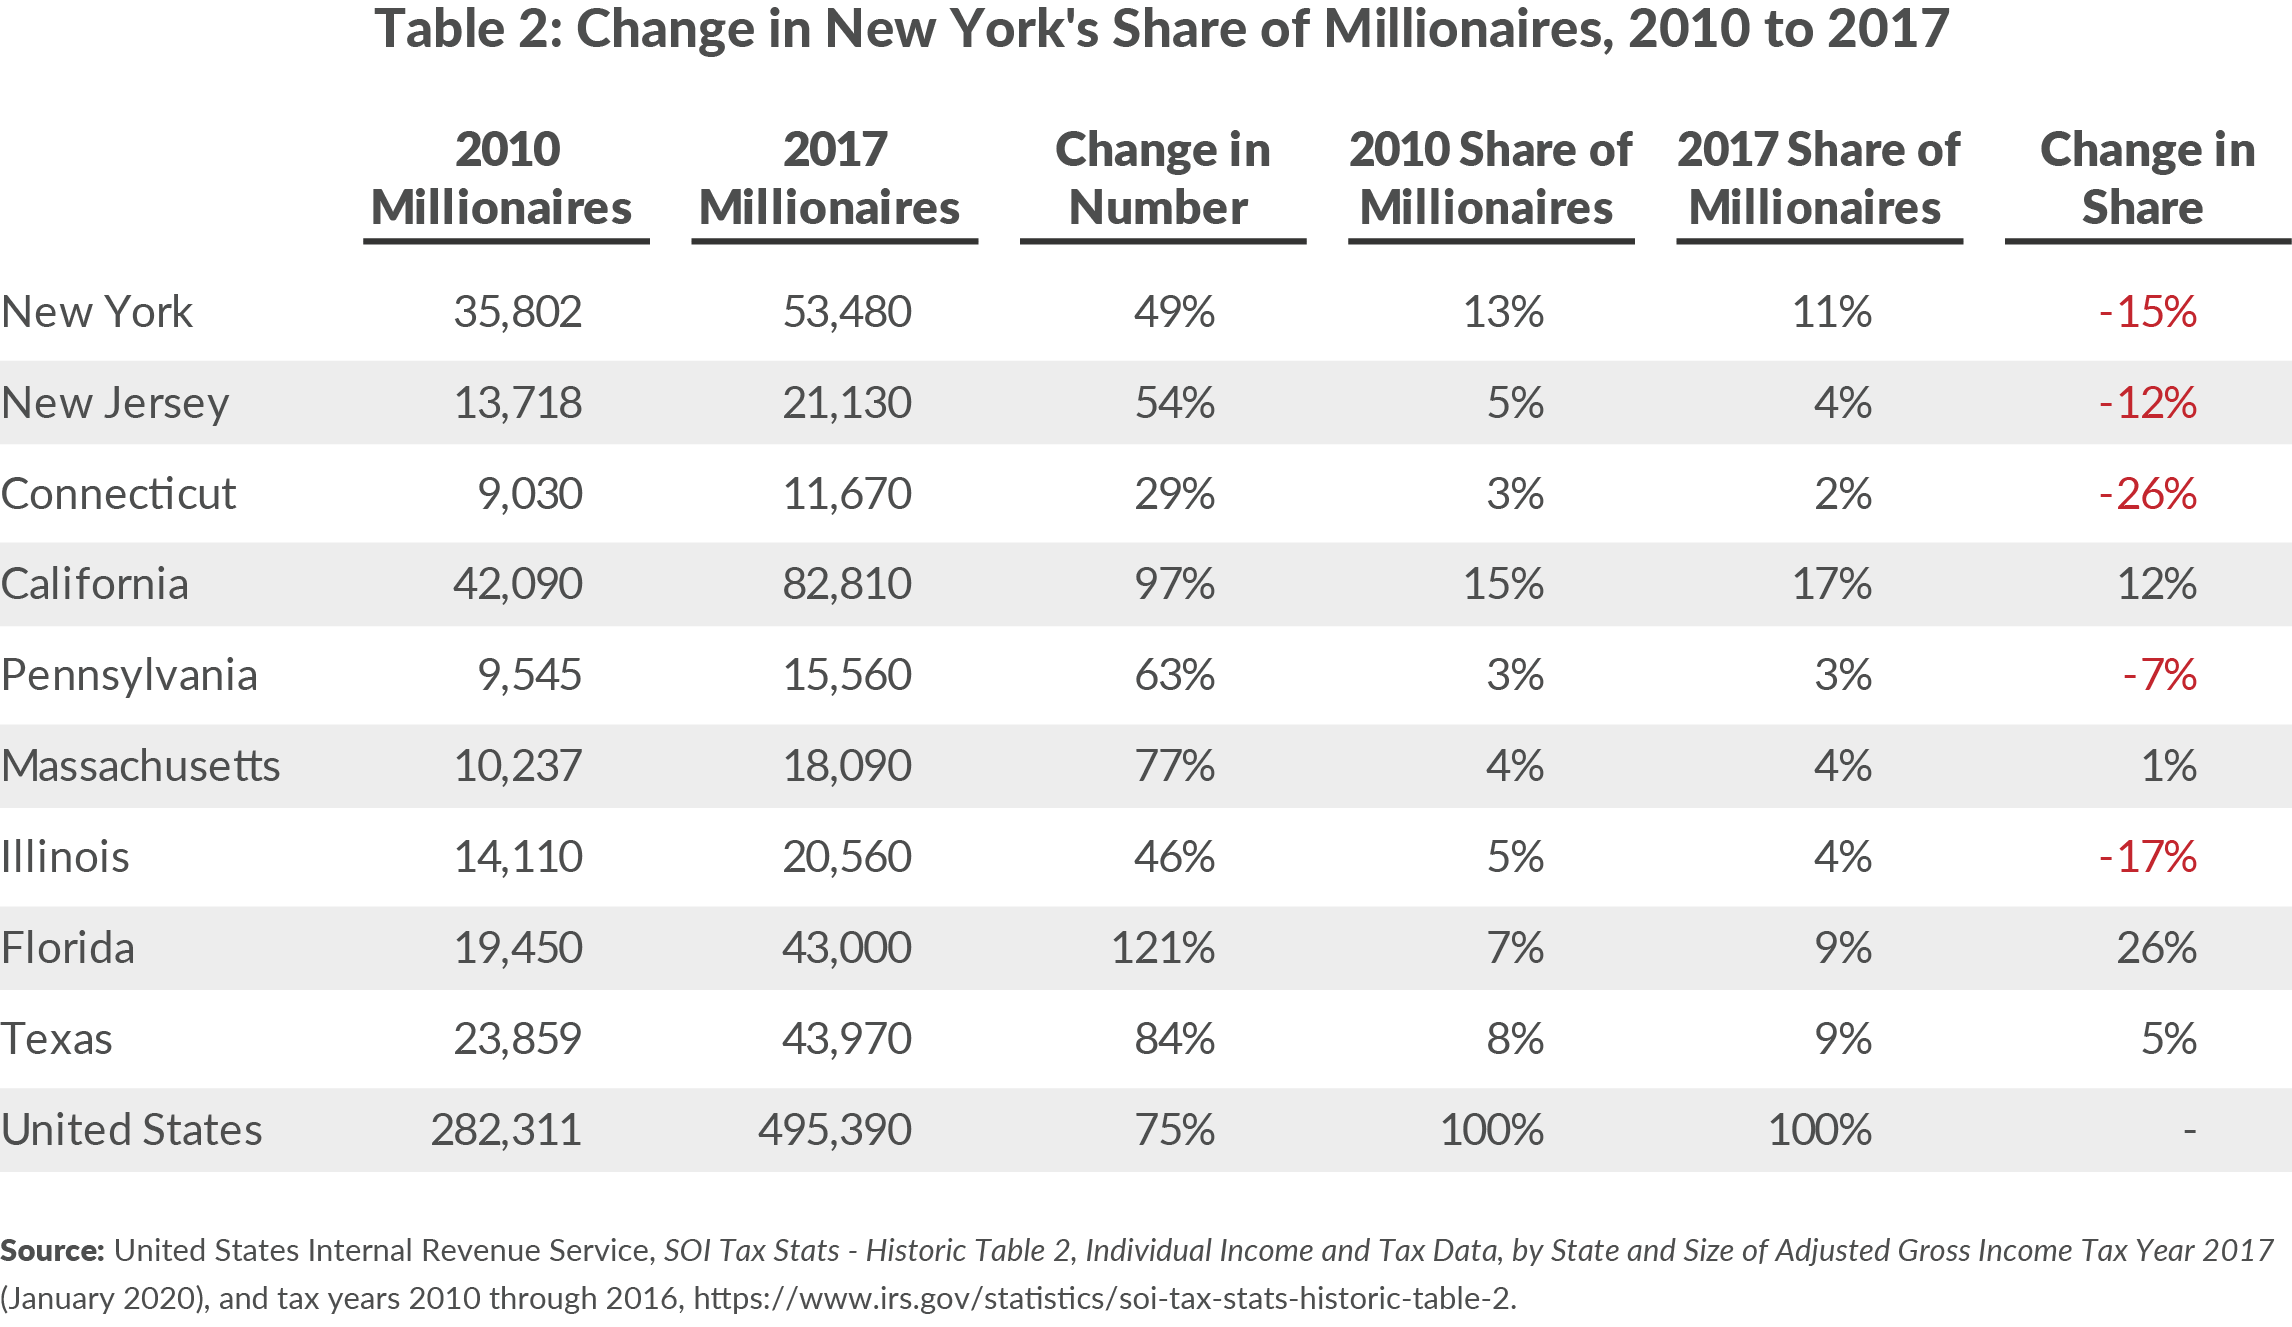 Table 2: Change in New York's Share of Millionaires, 2010 to 2017